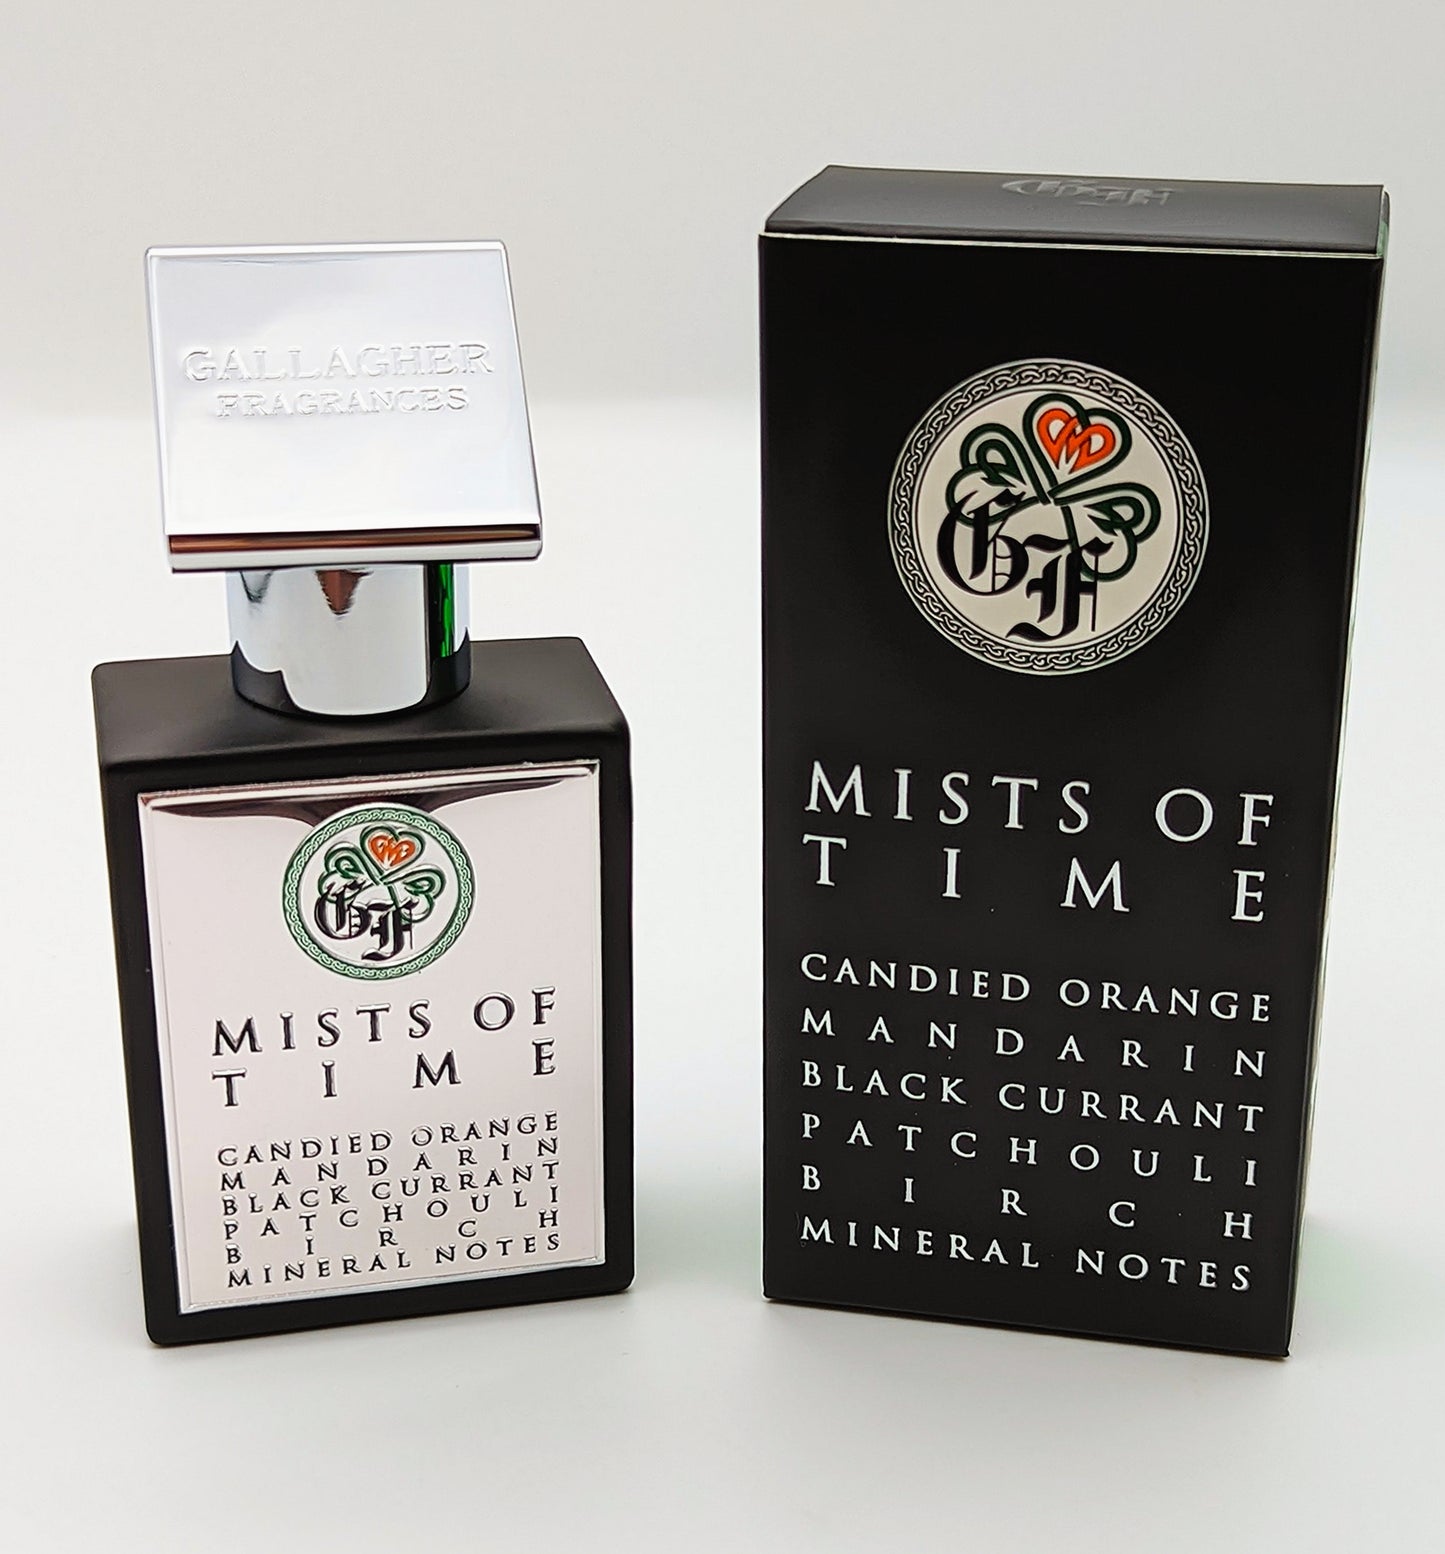 Mists of Time - Candied Orange, Black Currant, Birch, Mineral Notes